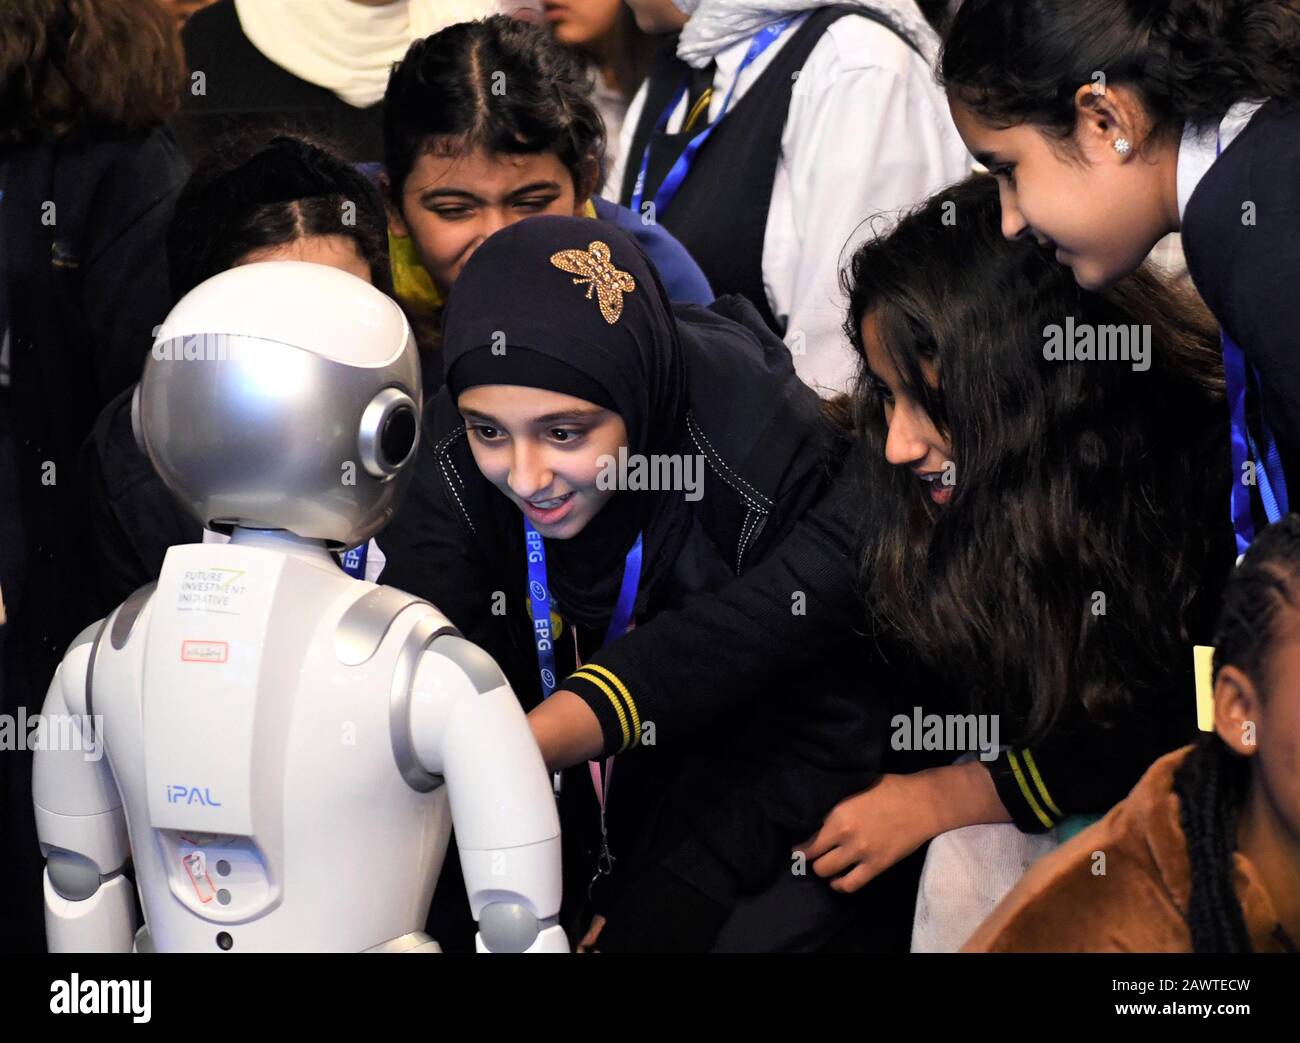 Beijing, Kuwait. 9th Feb, 2020. Children interact with a robot at the Robotics and Artificial Intelligence (AI) Festival in Hawalli Governorate, Kuwait, on Feb. 9, 2020. Credit: Ghazy Qaffaf/Xinhua/Alamy Live News Stock Photo